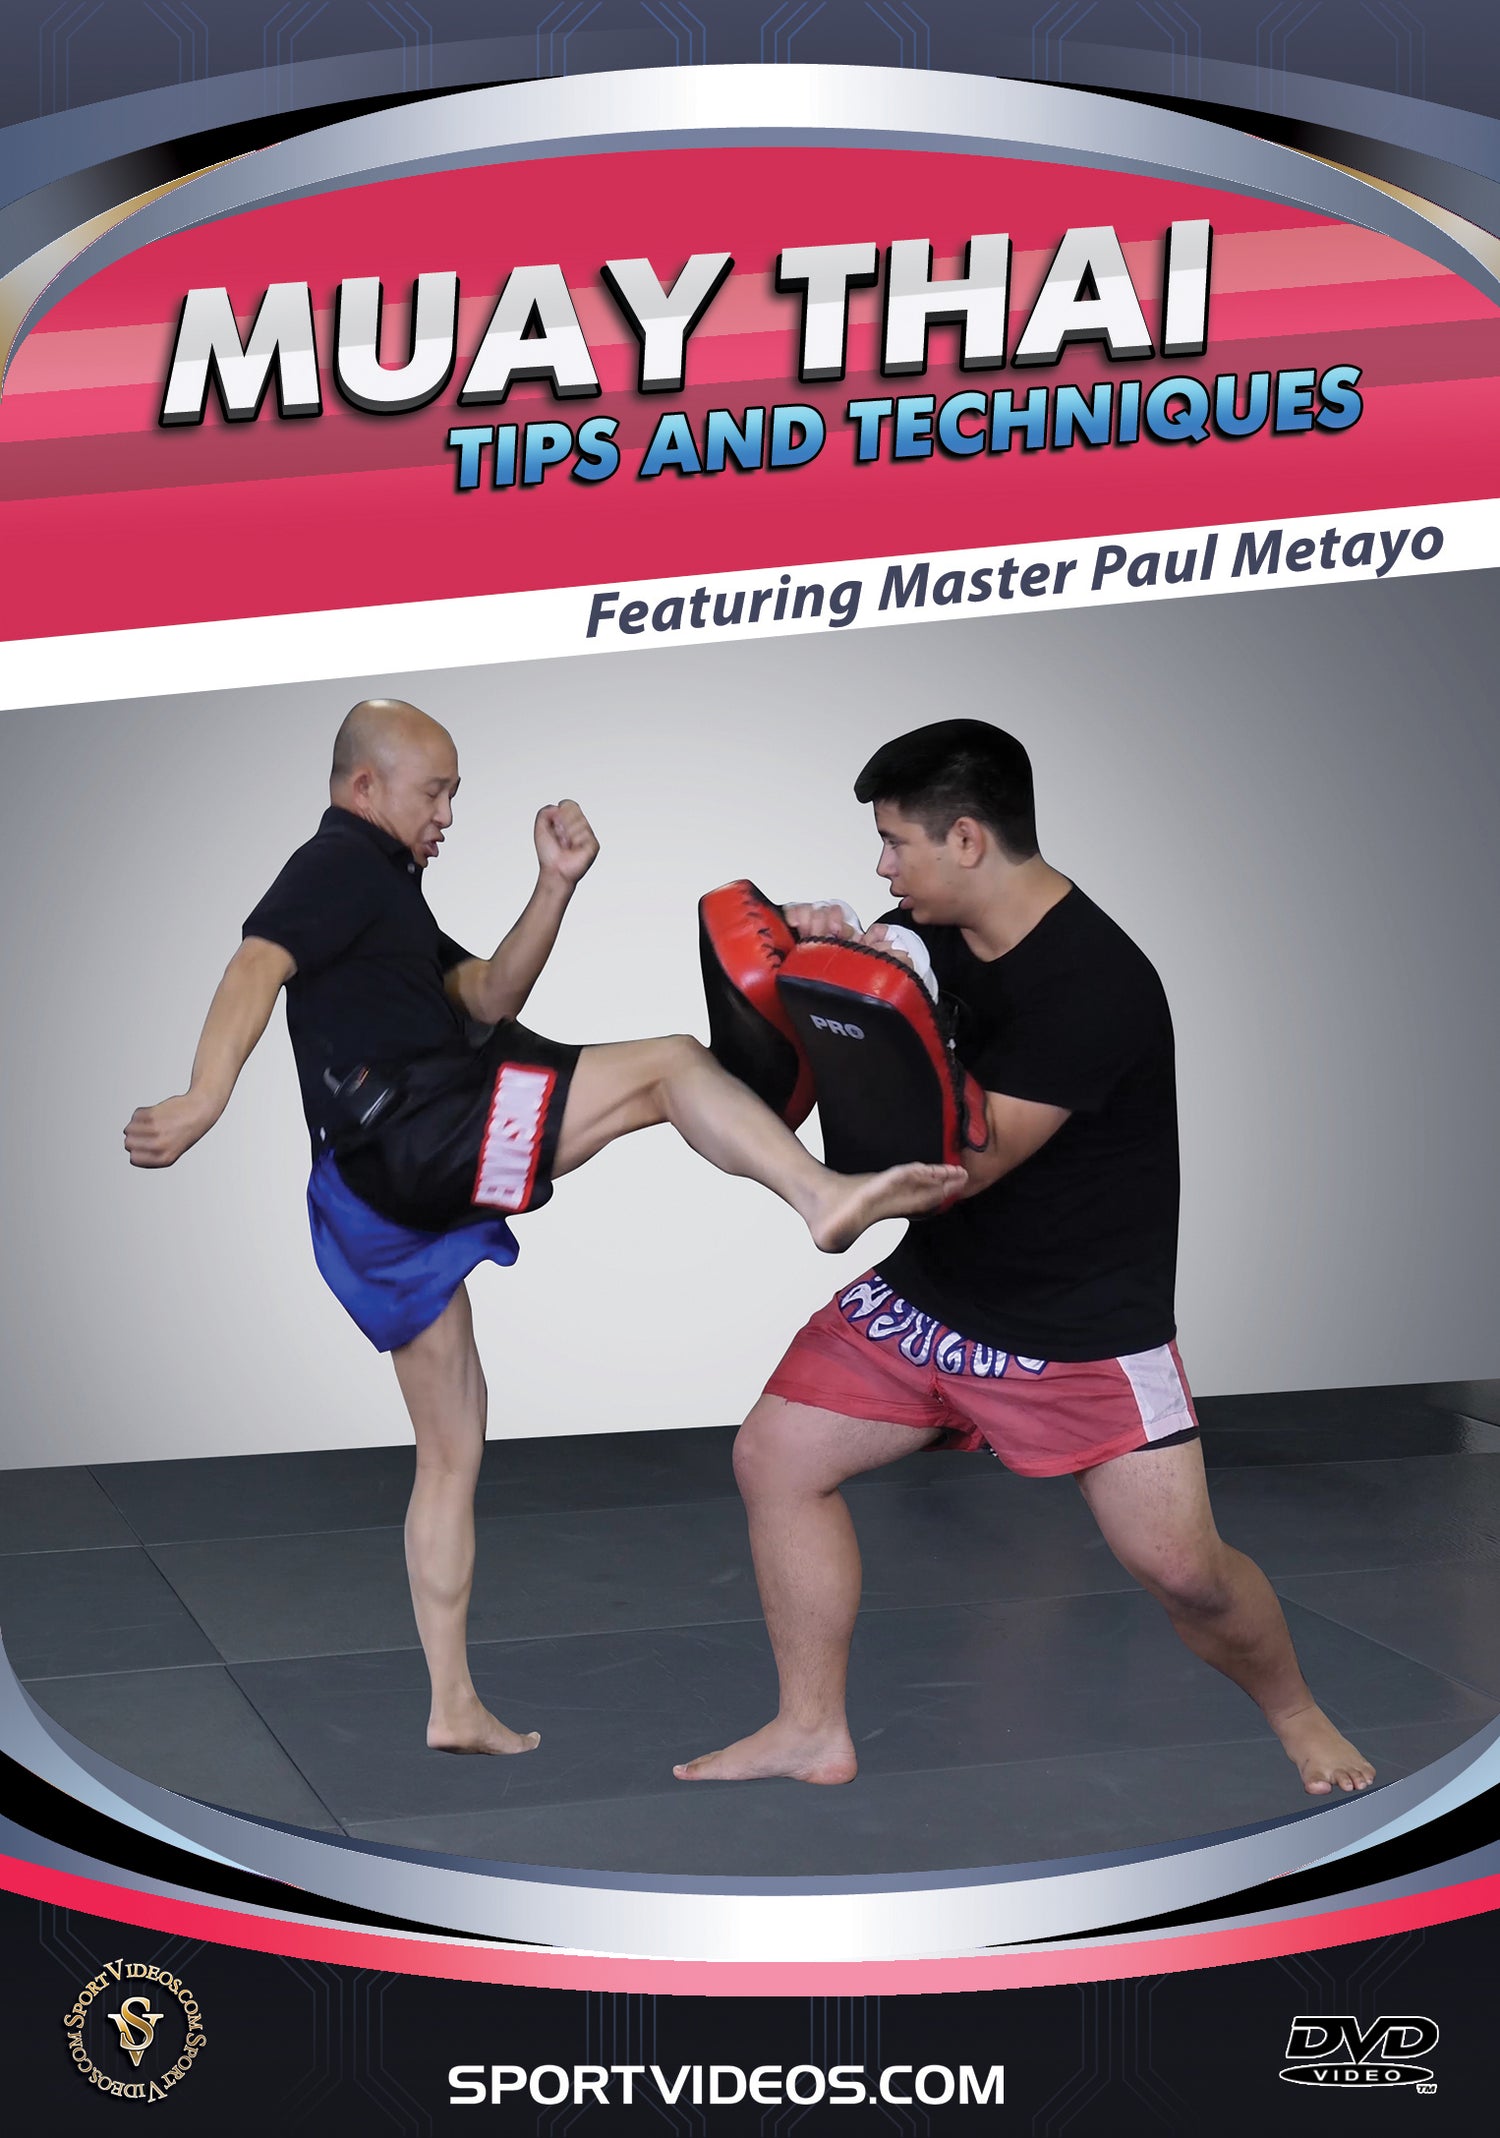 Muay Thai Tips and Techniques DVD by Paul Metayo - Budovideos Inc